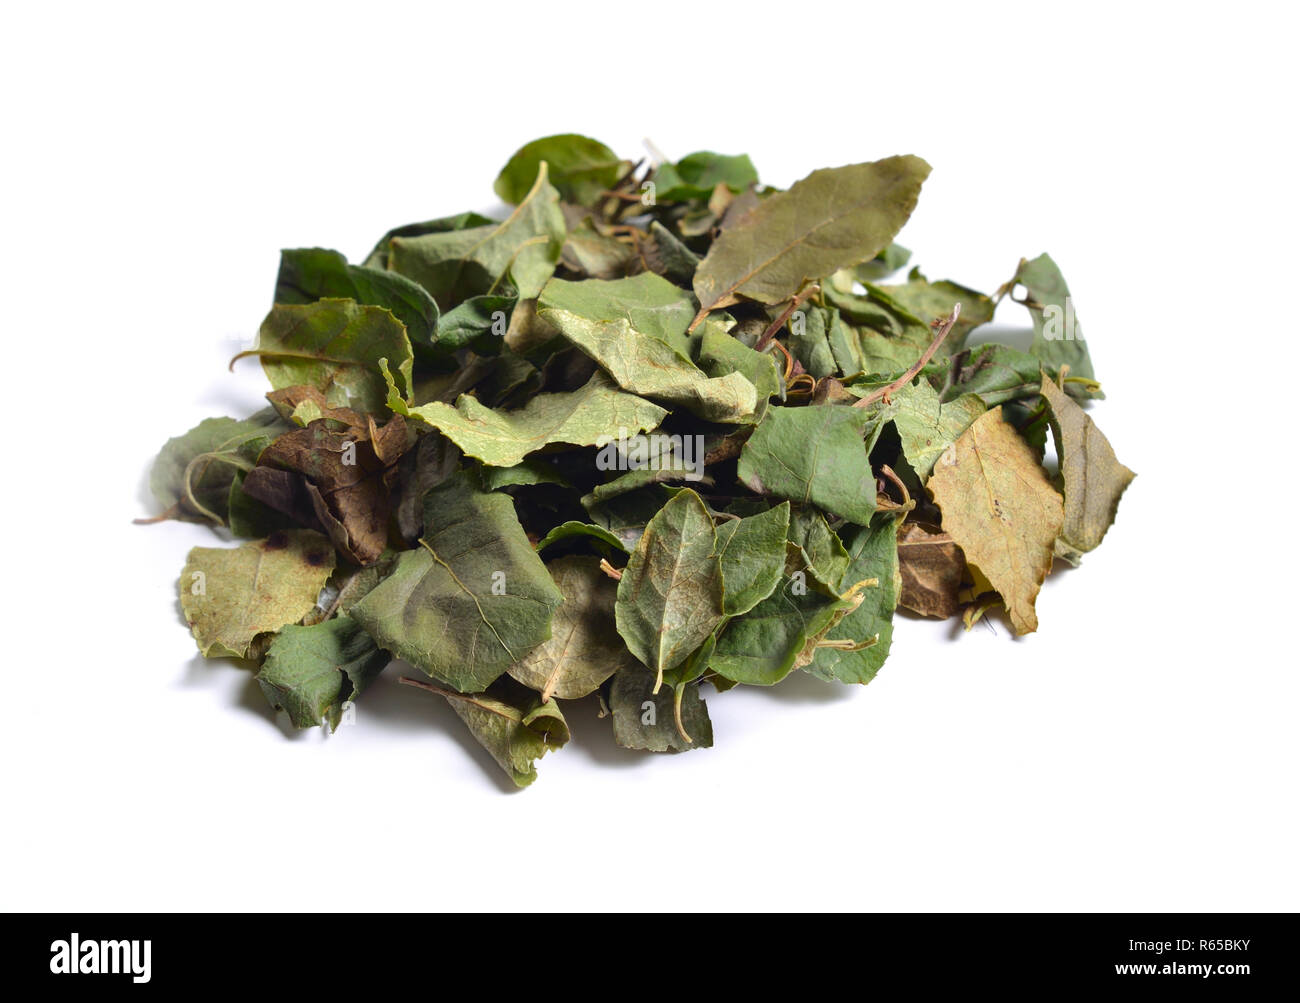 Dried medicinal herbs raw materials isolated on white. Leaves of Orthilia secunda. Stock Photo